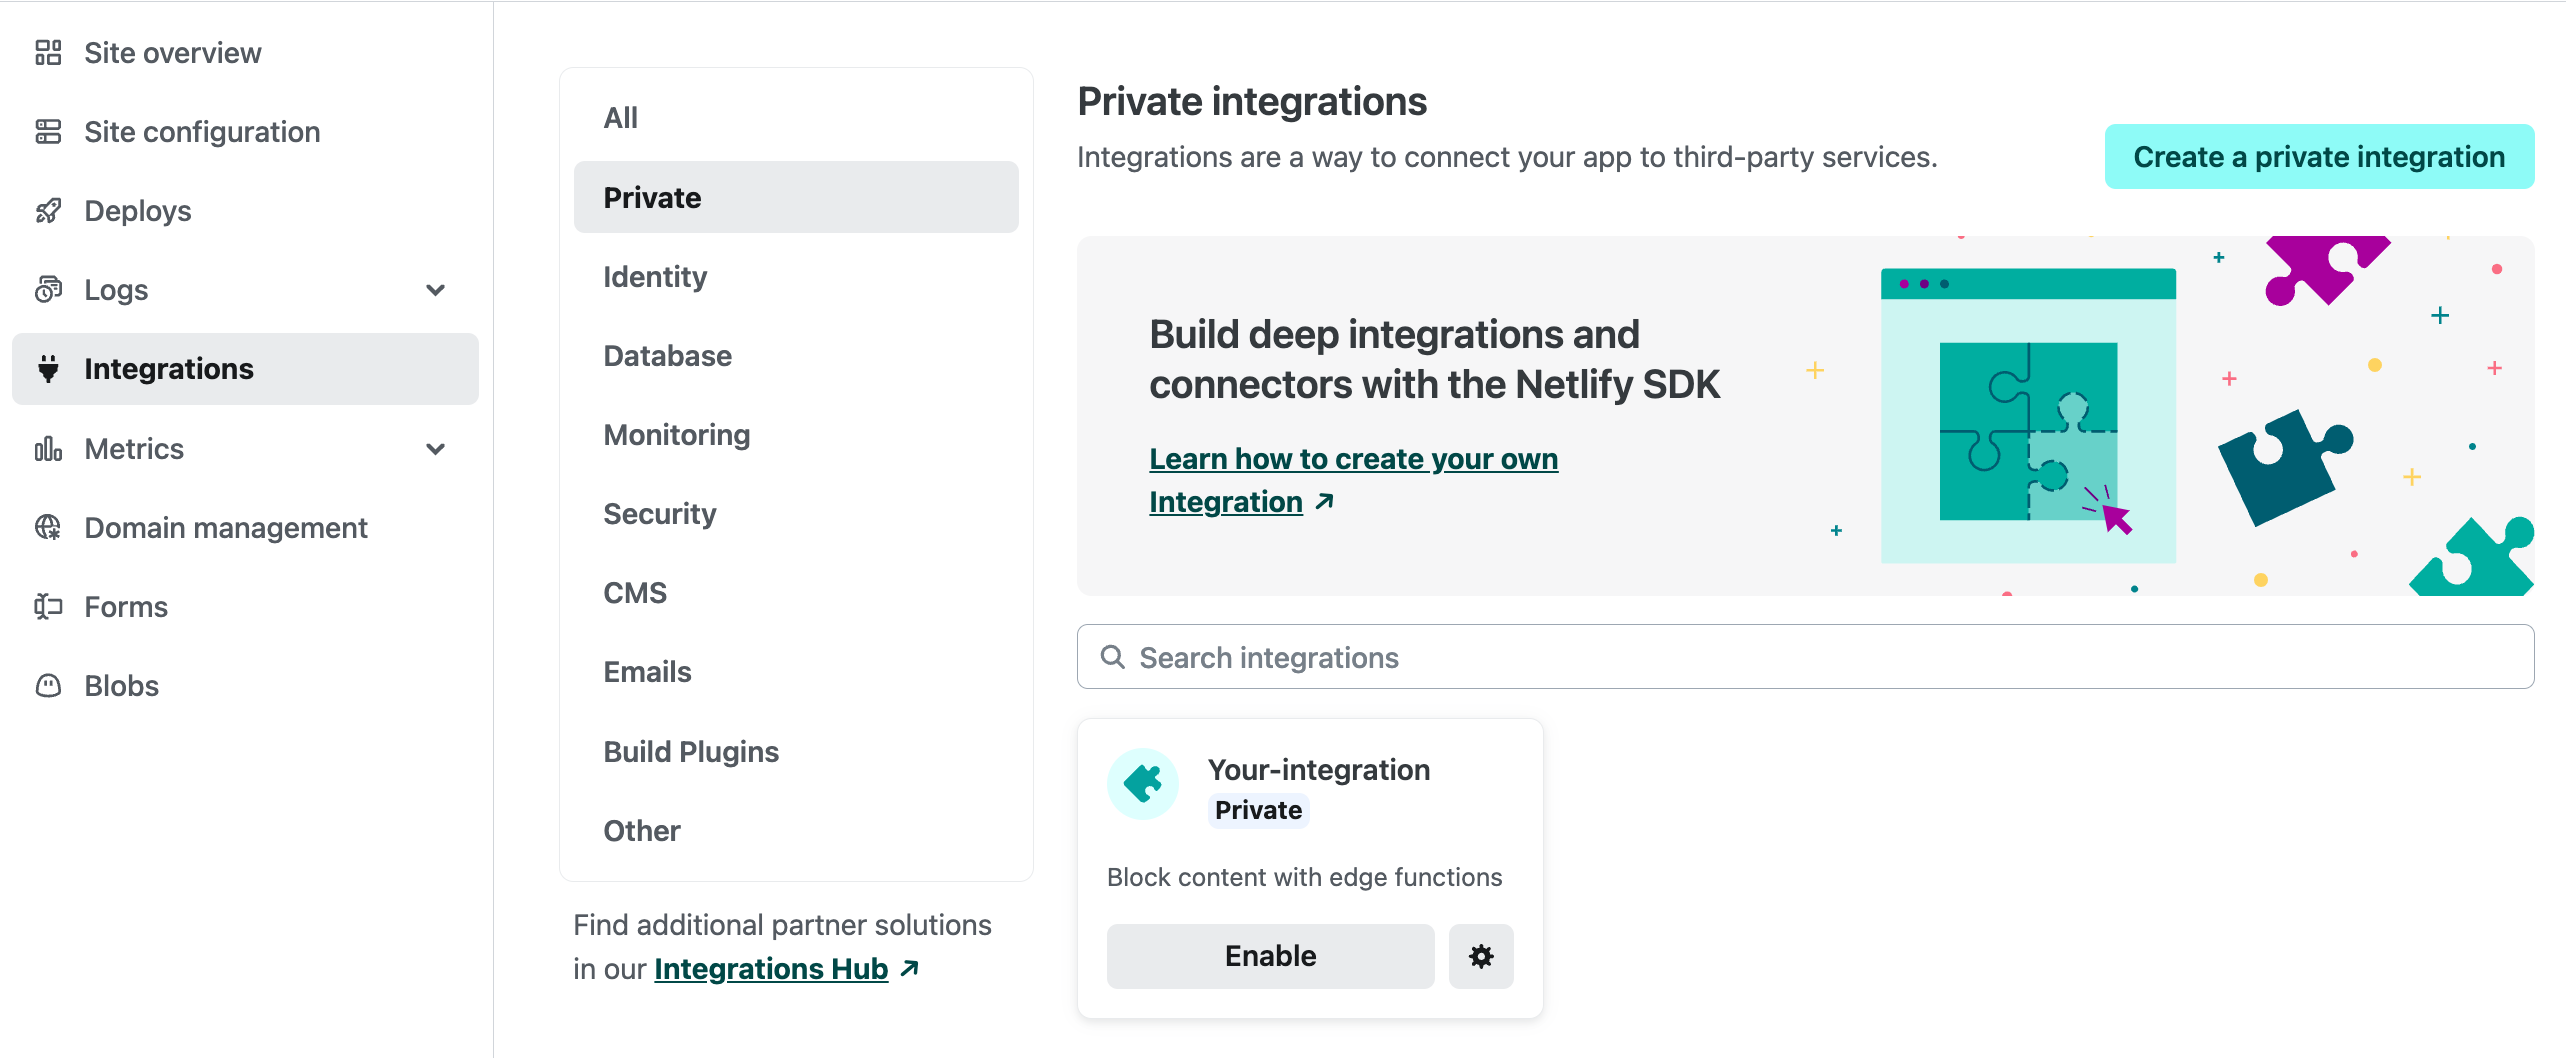 Enable your integration by selecting 'enable' on the integration card in the Netlify UI